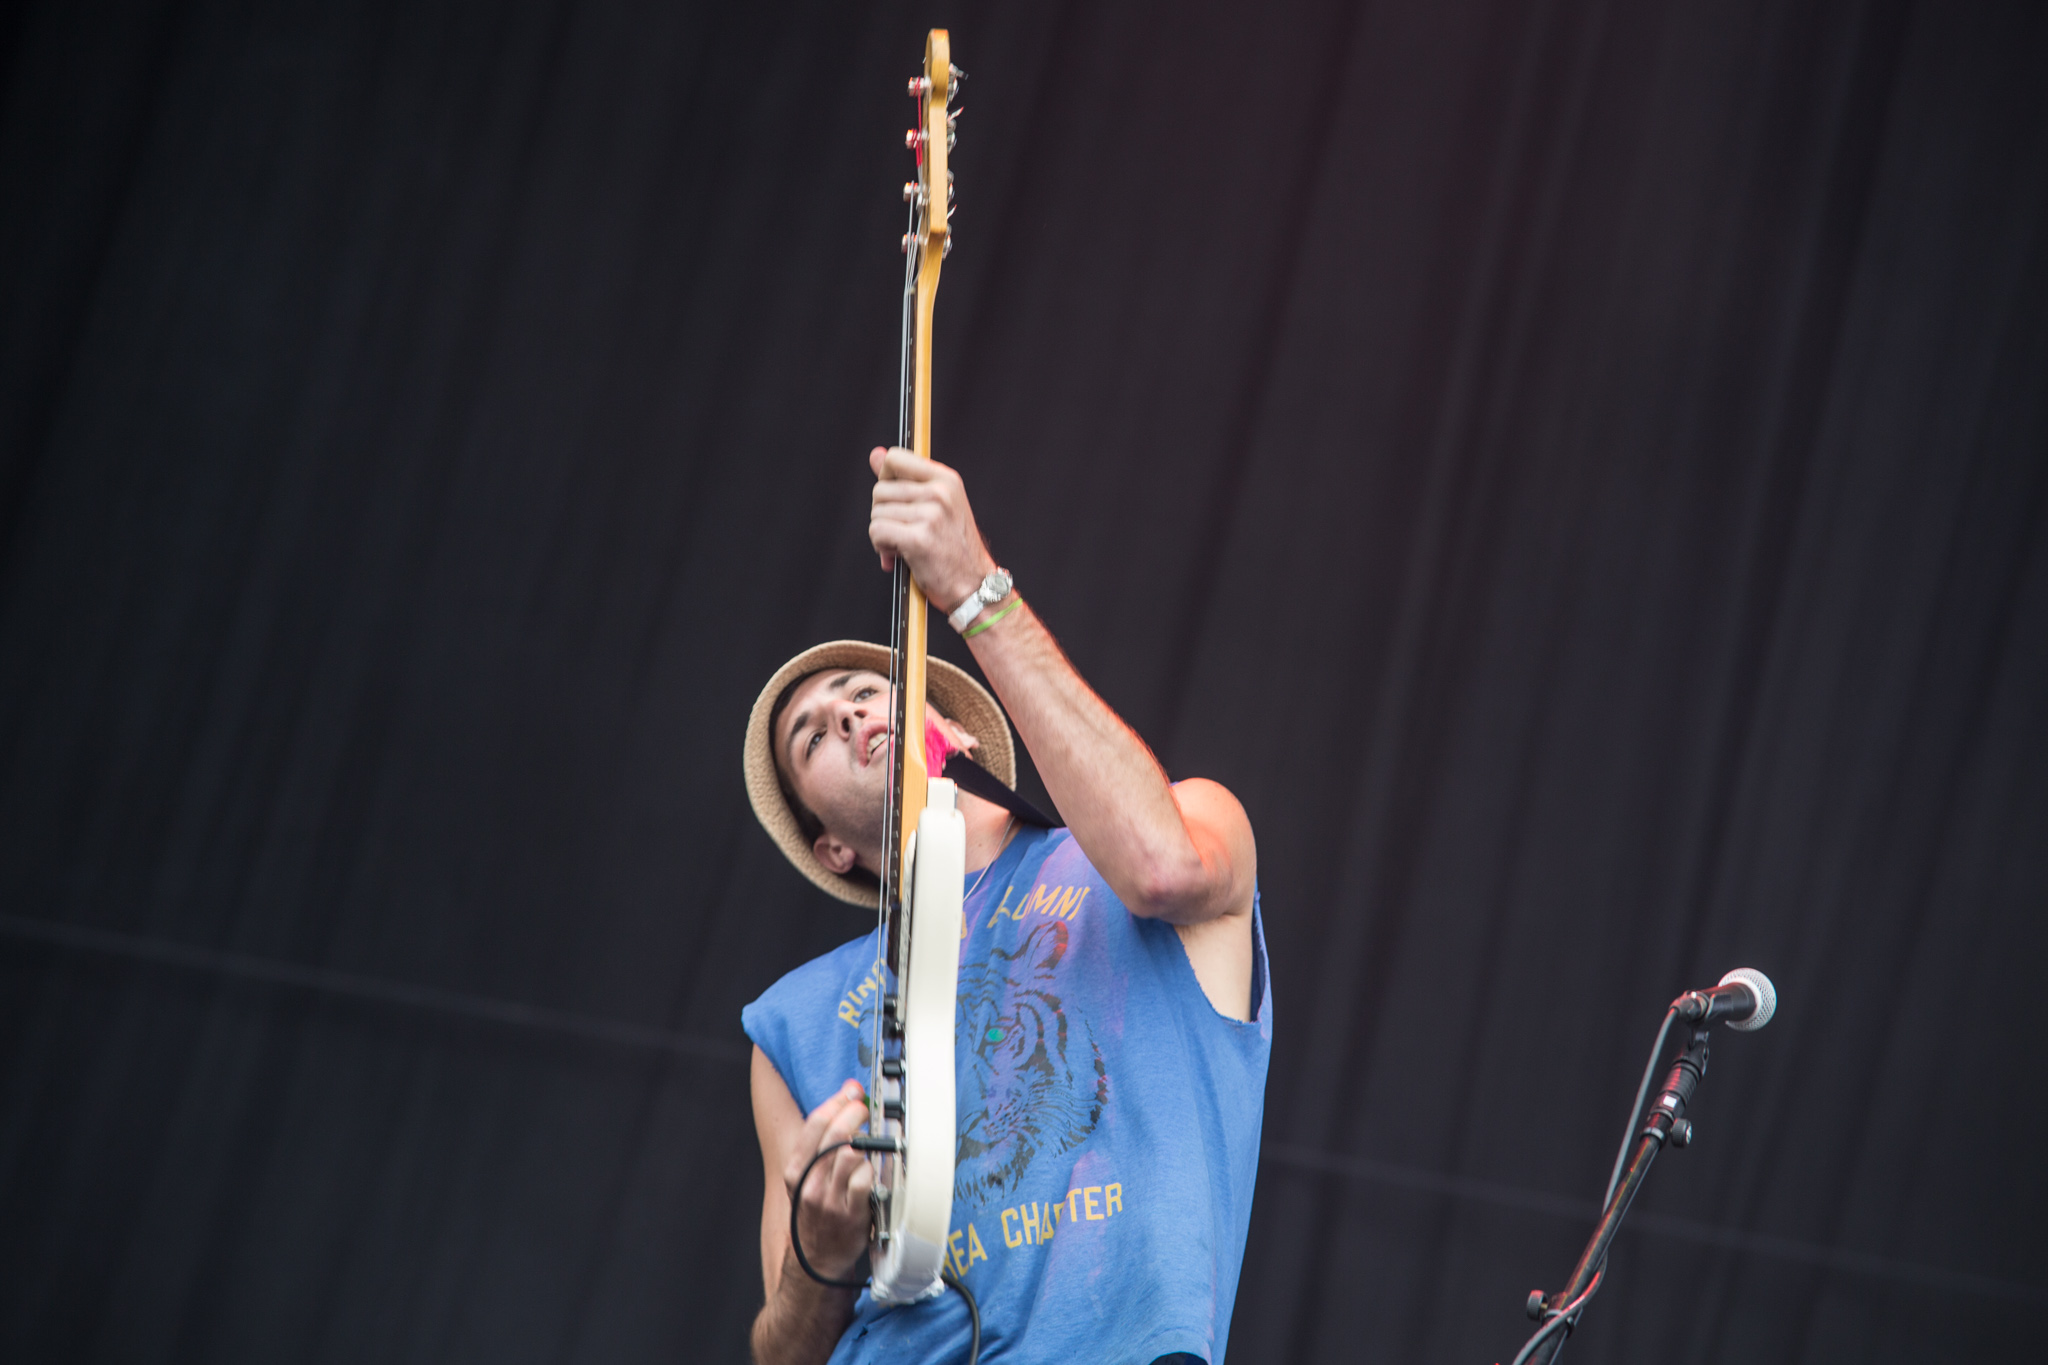 Reading's main stage is no risk for FIDLAR